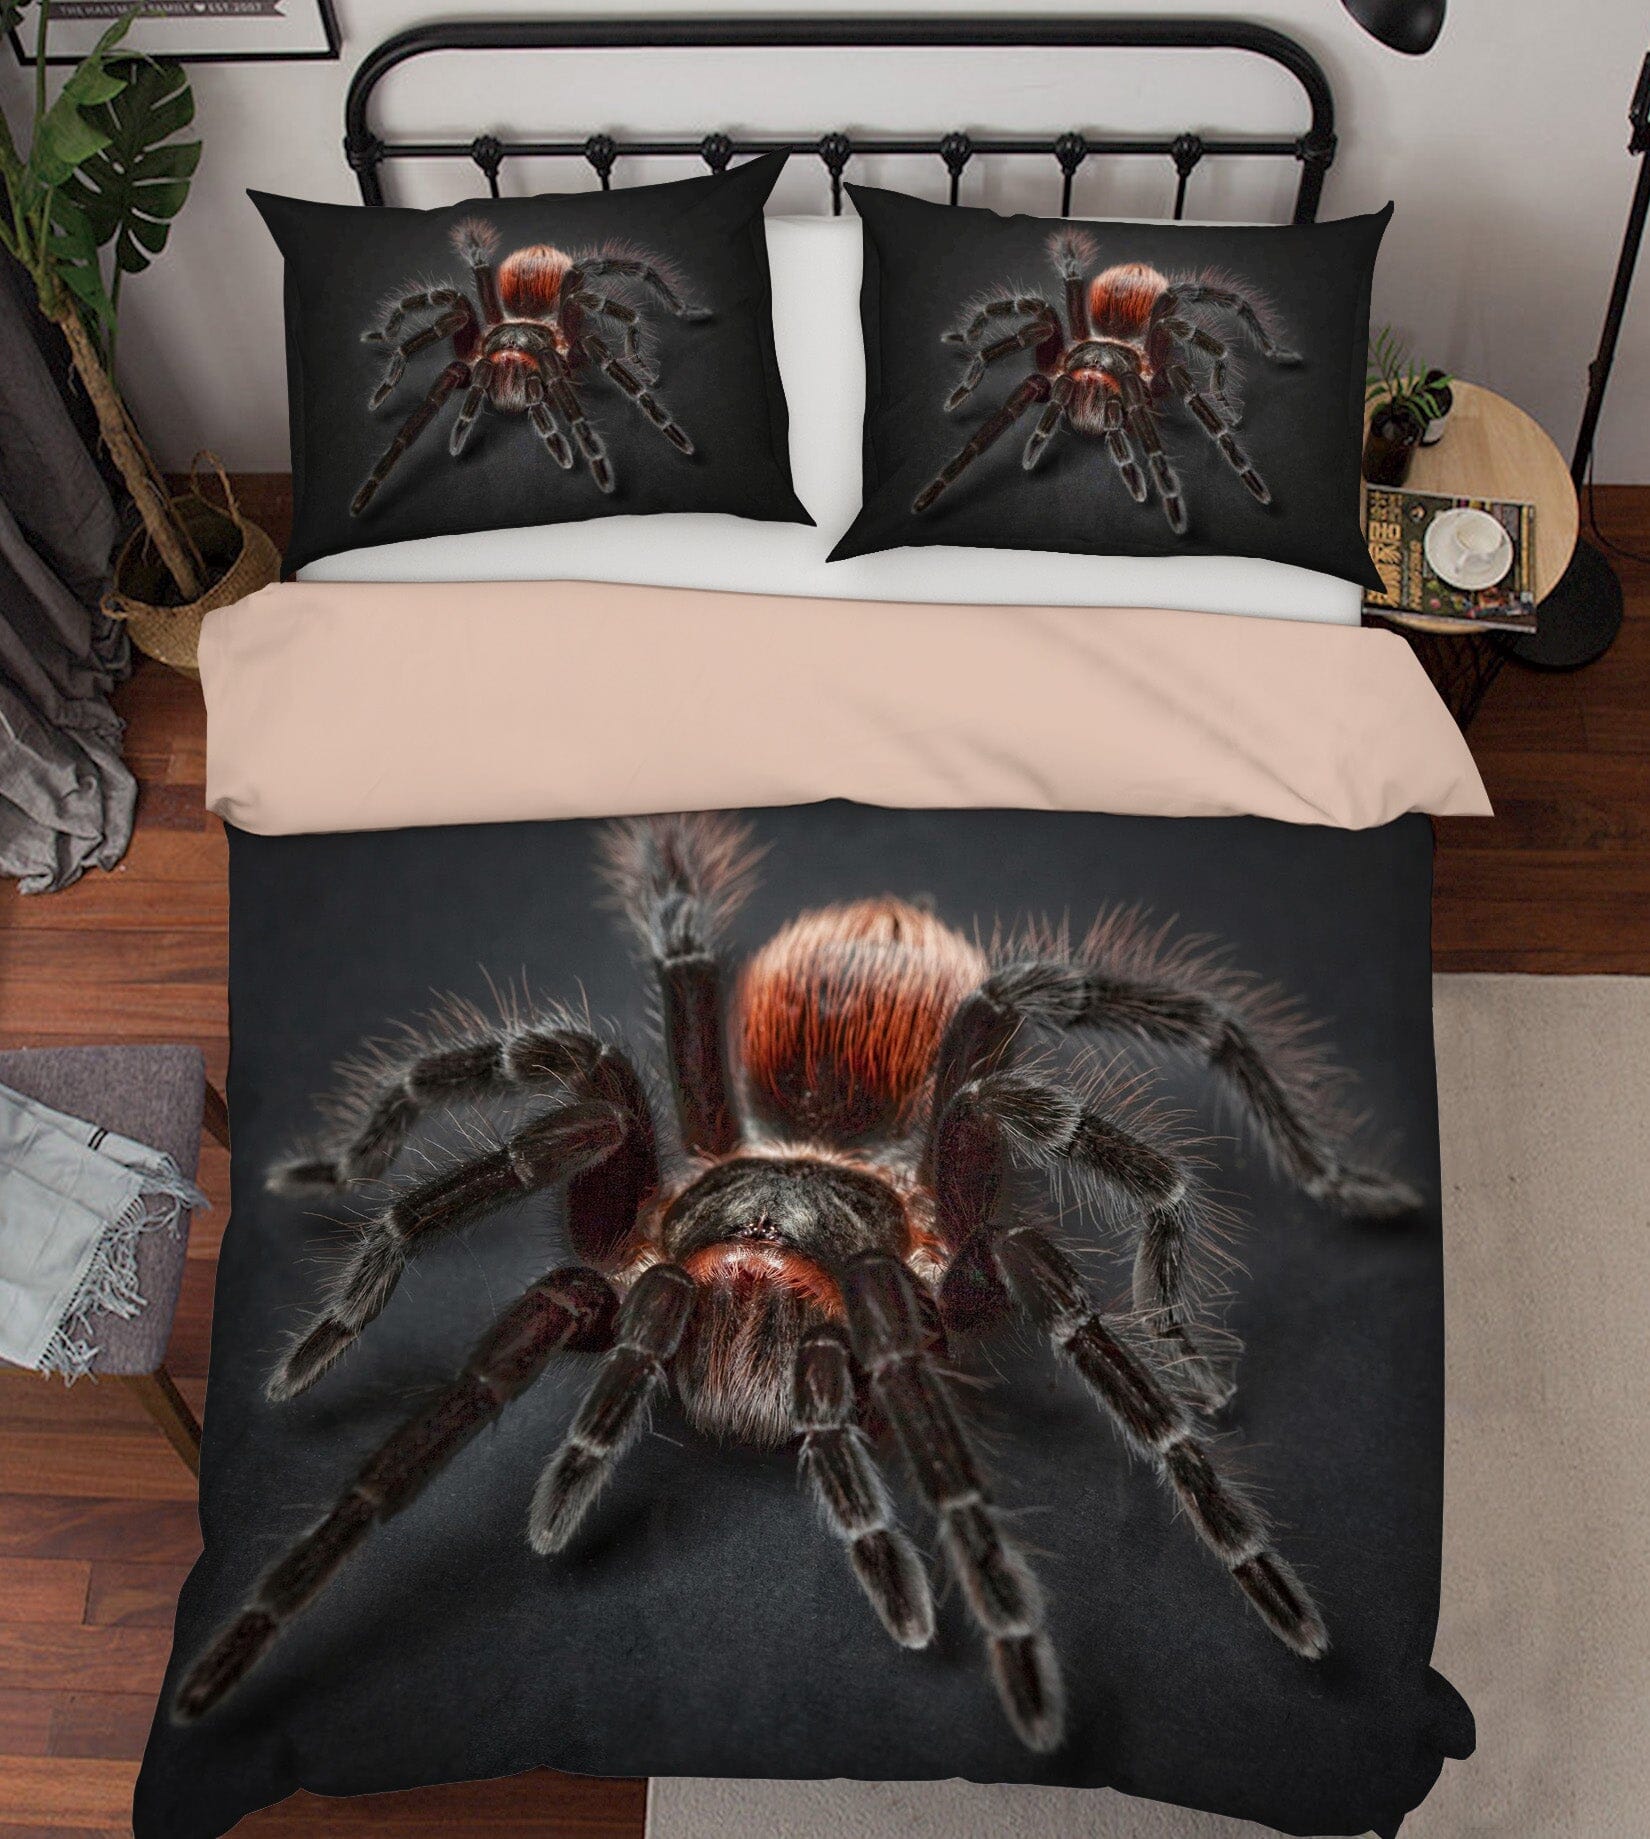 3D Poison Spider 1943 Bed Pillowcases Quilt Quiet Covers AJ Creativity Home 